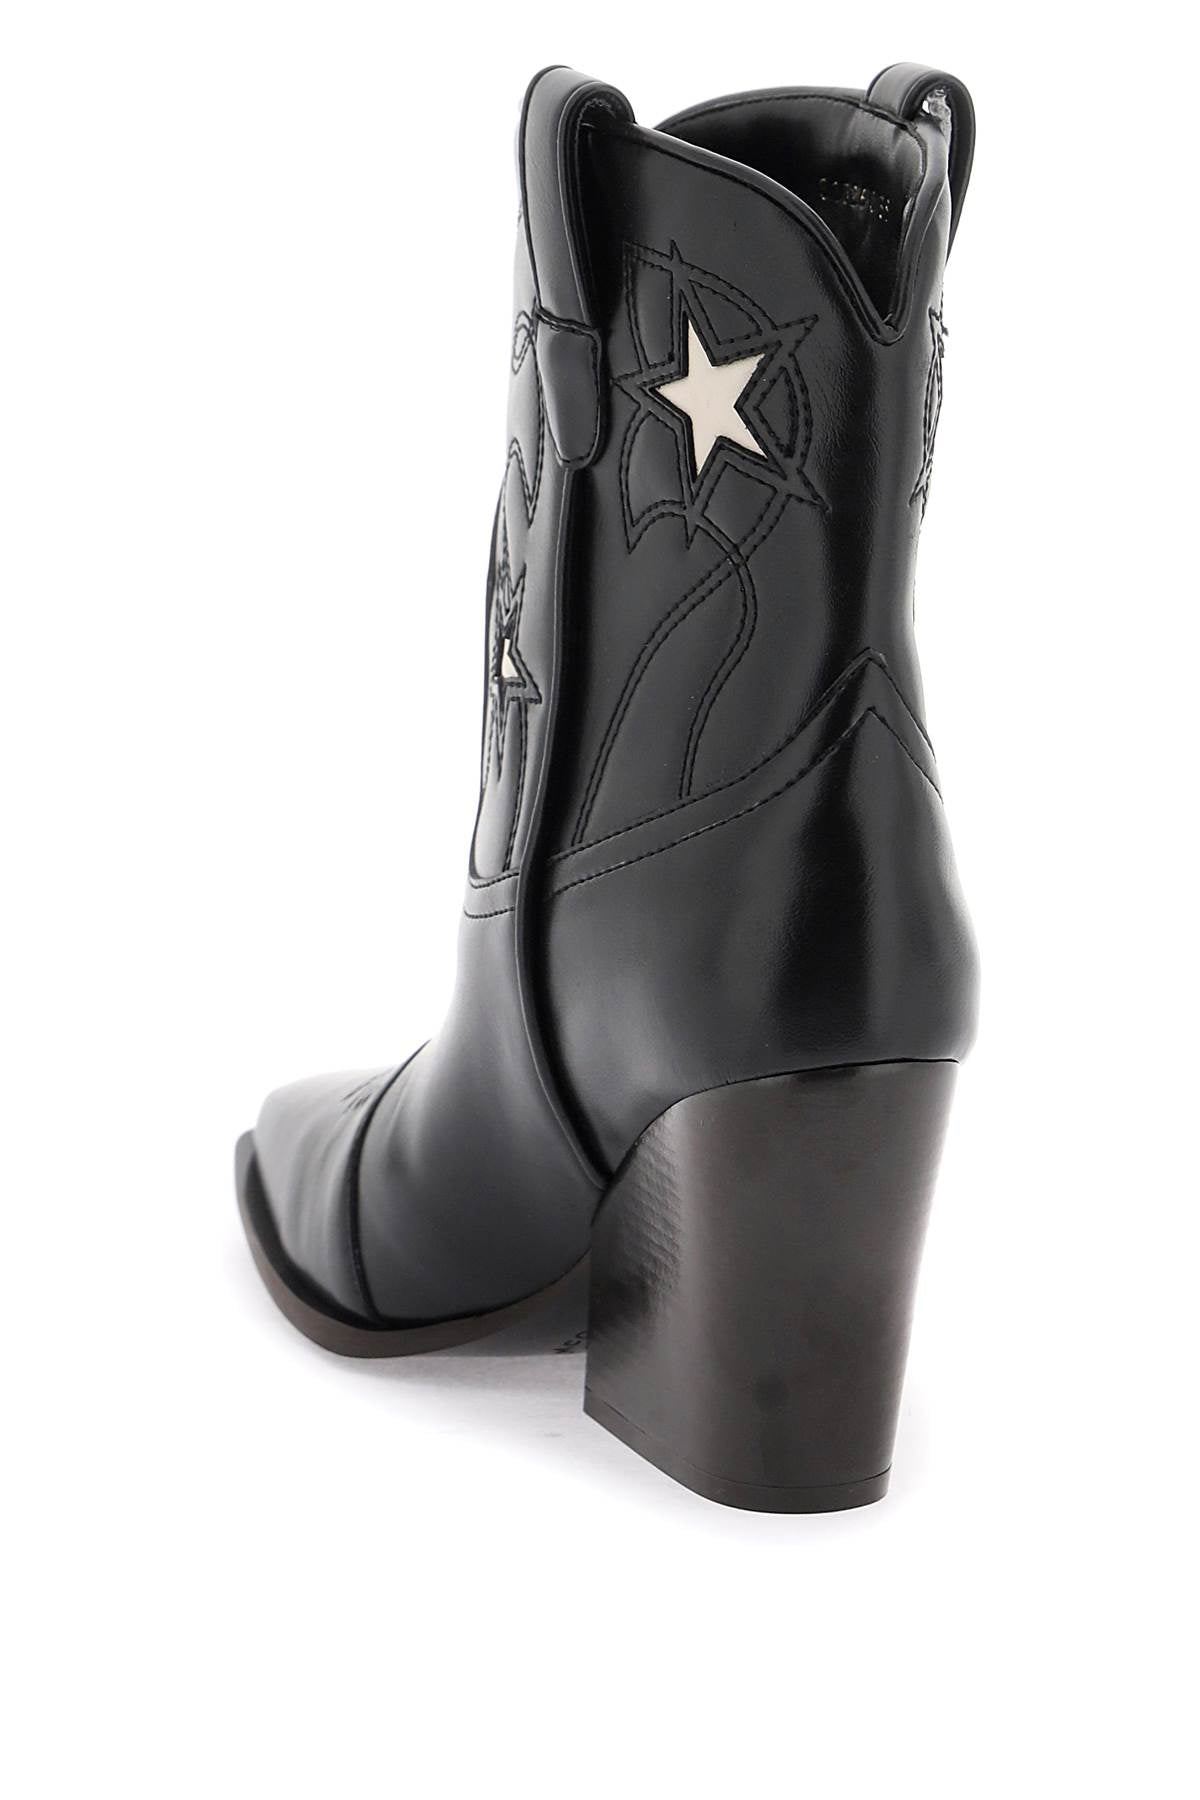 Stella mccartney texan ankle boots with star embroidery-2